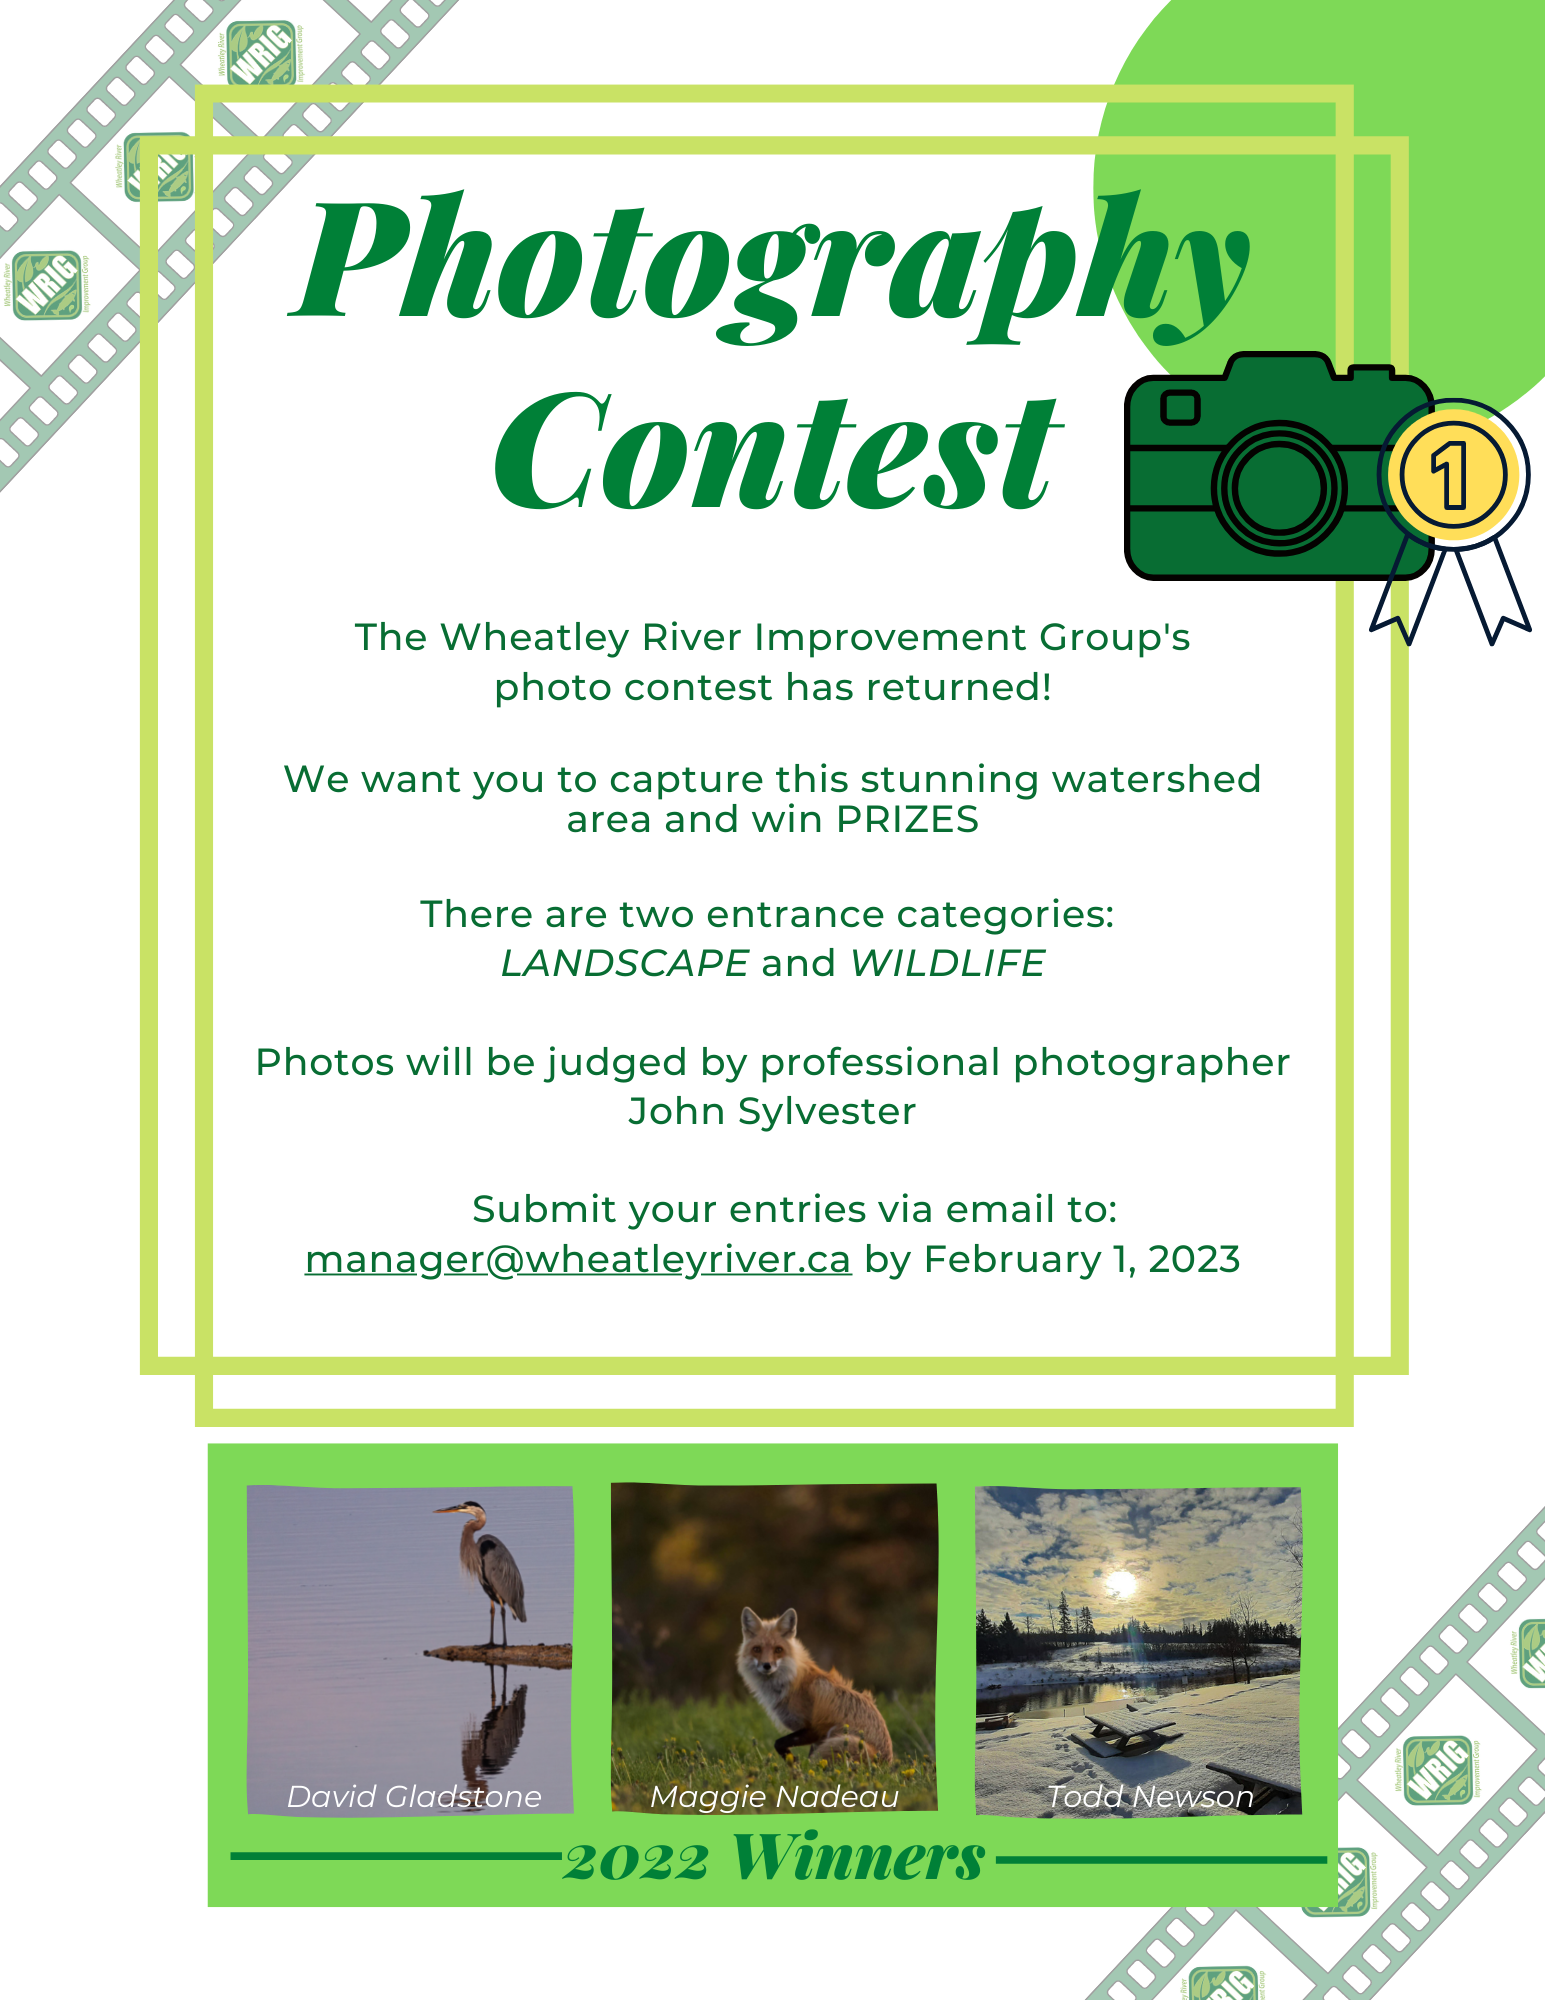 Photography Contest 2023